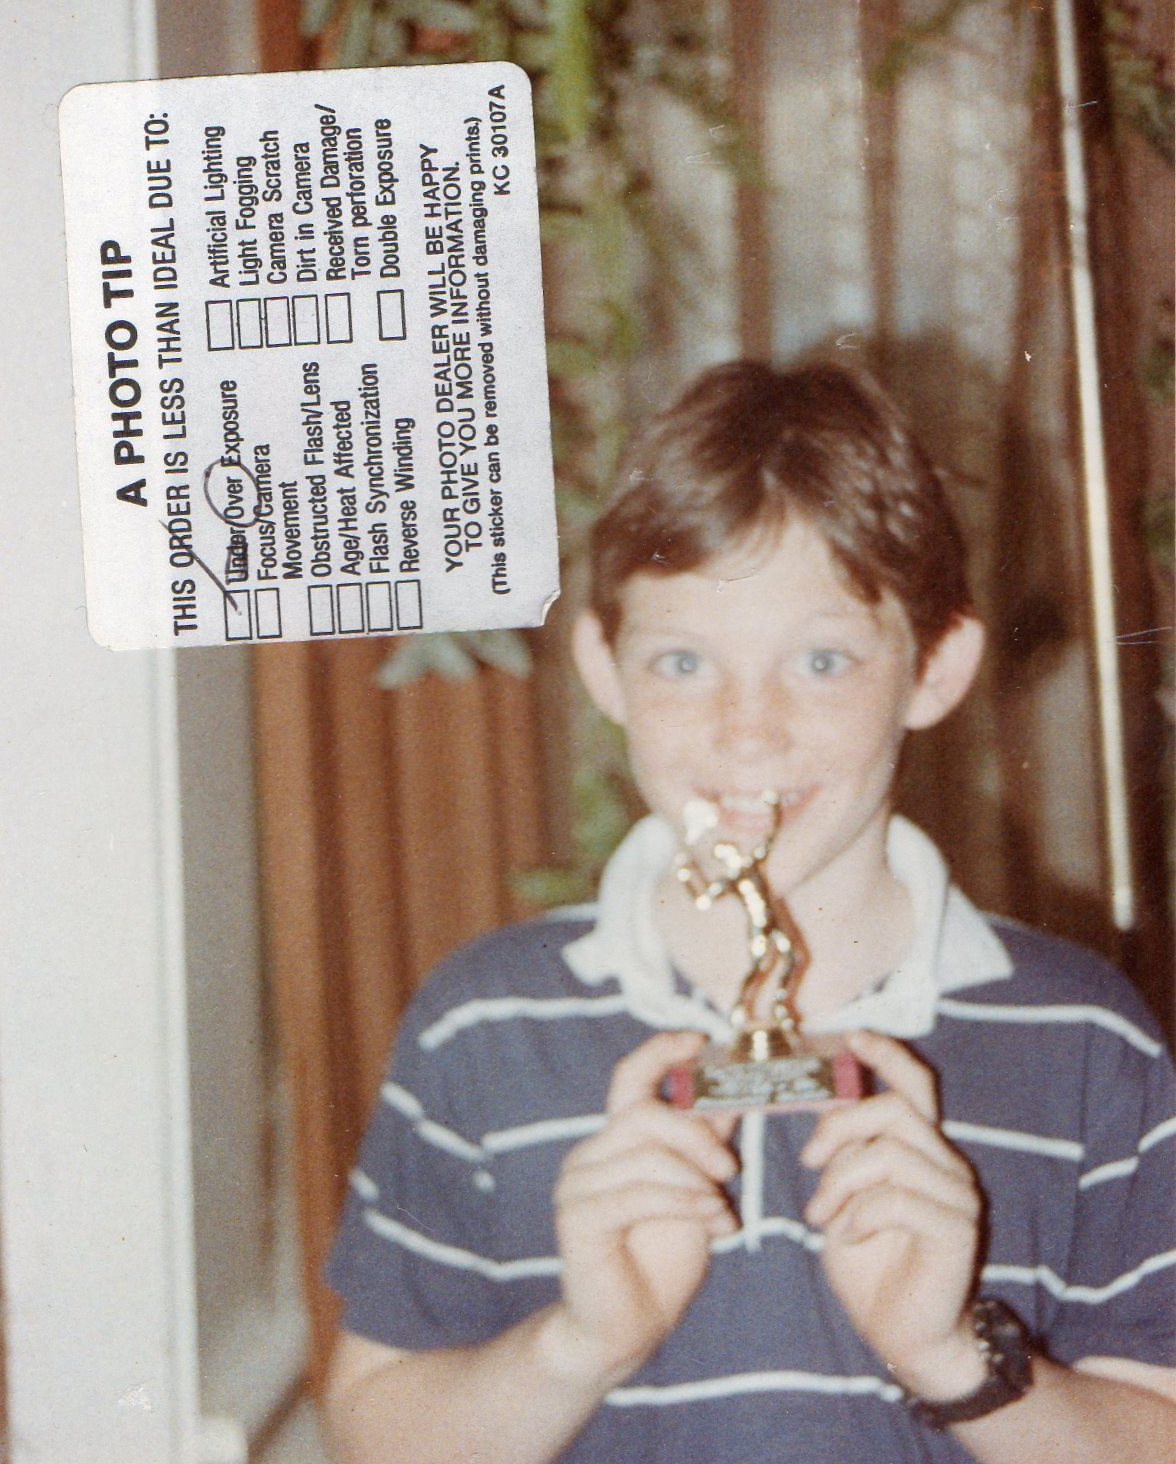 16 Christopher Wright showing off his tennis trophy.jpg